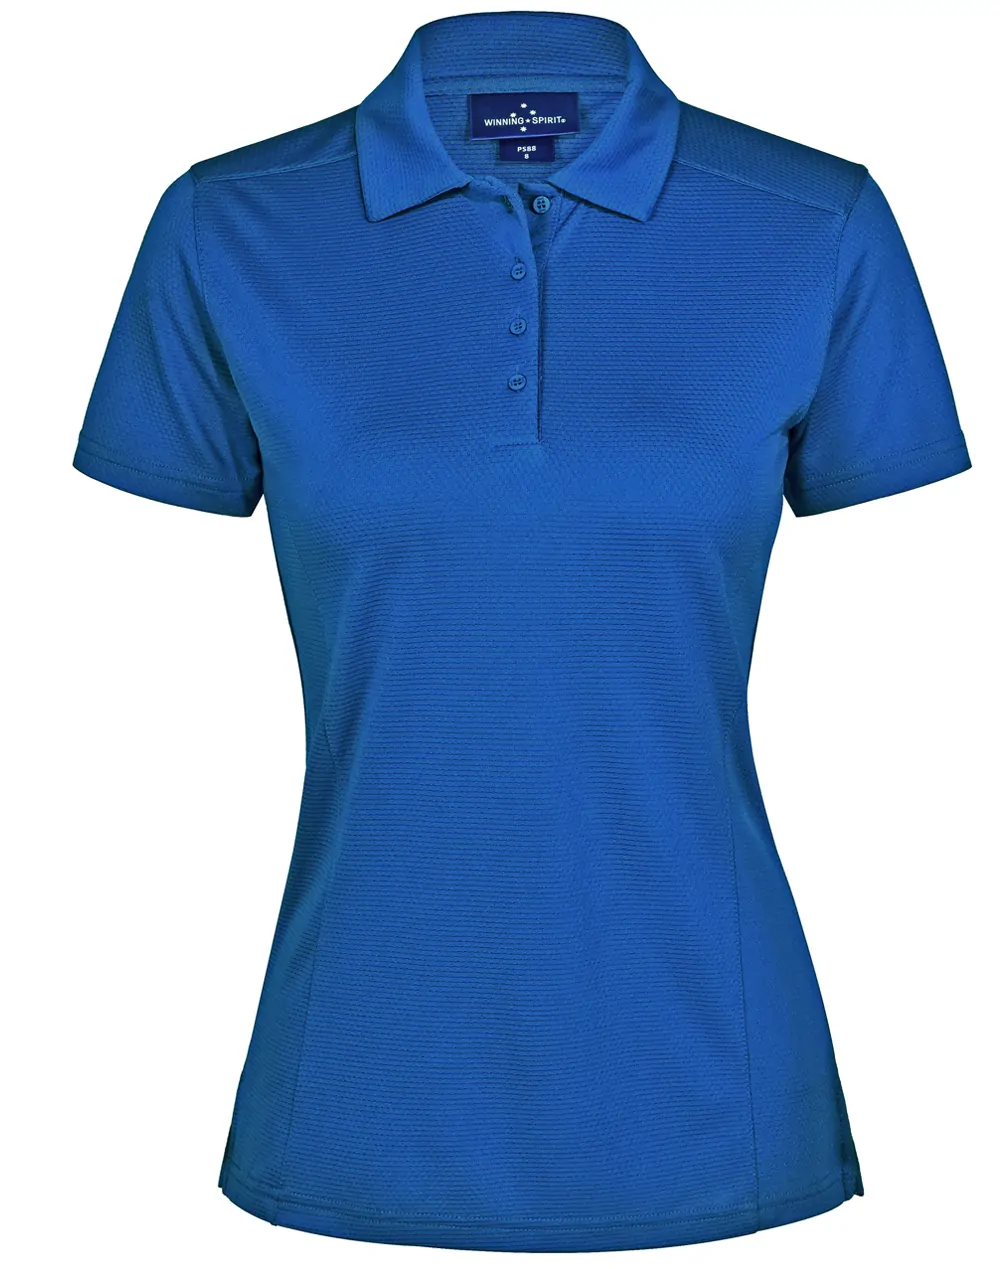 Bamboo Charcoal Corporate Short Sleeve Polo Ladies